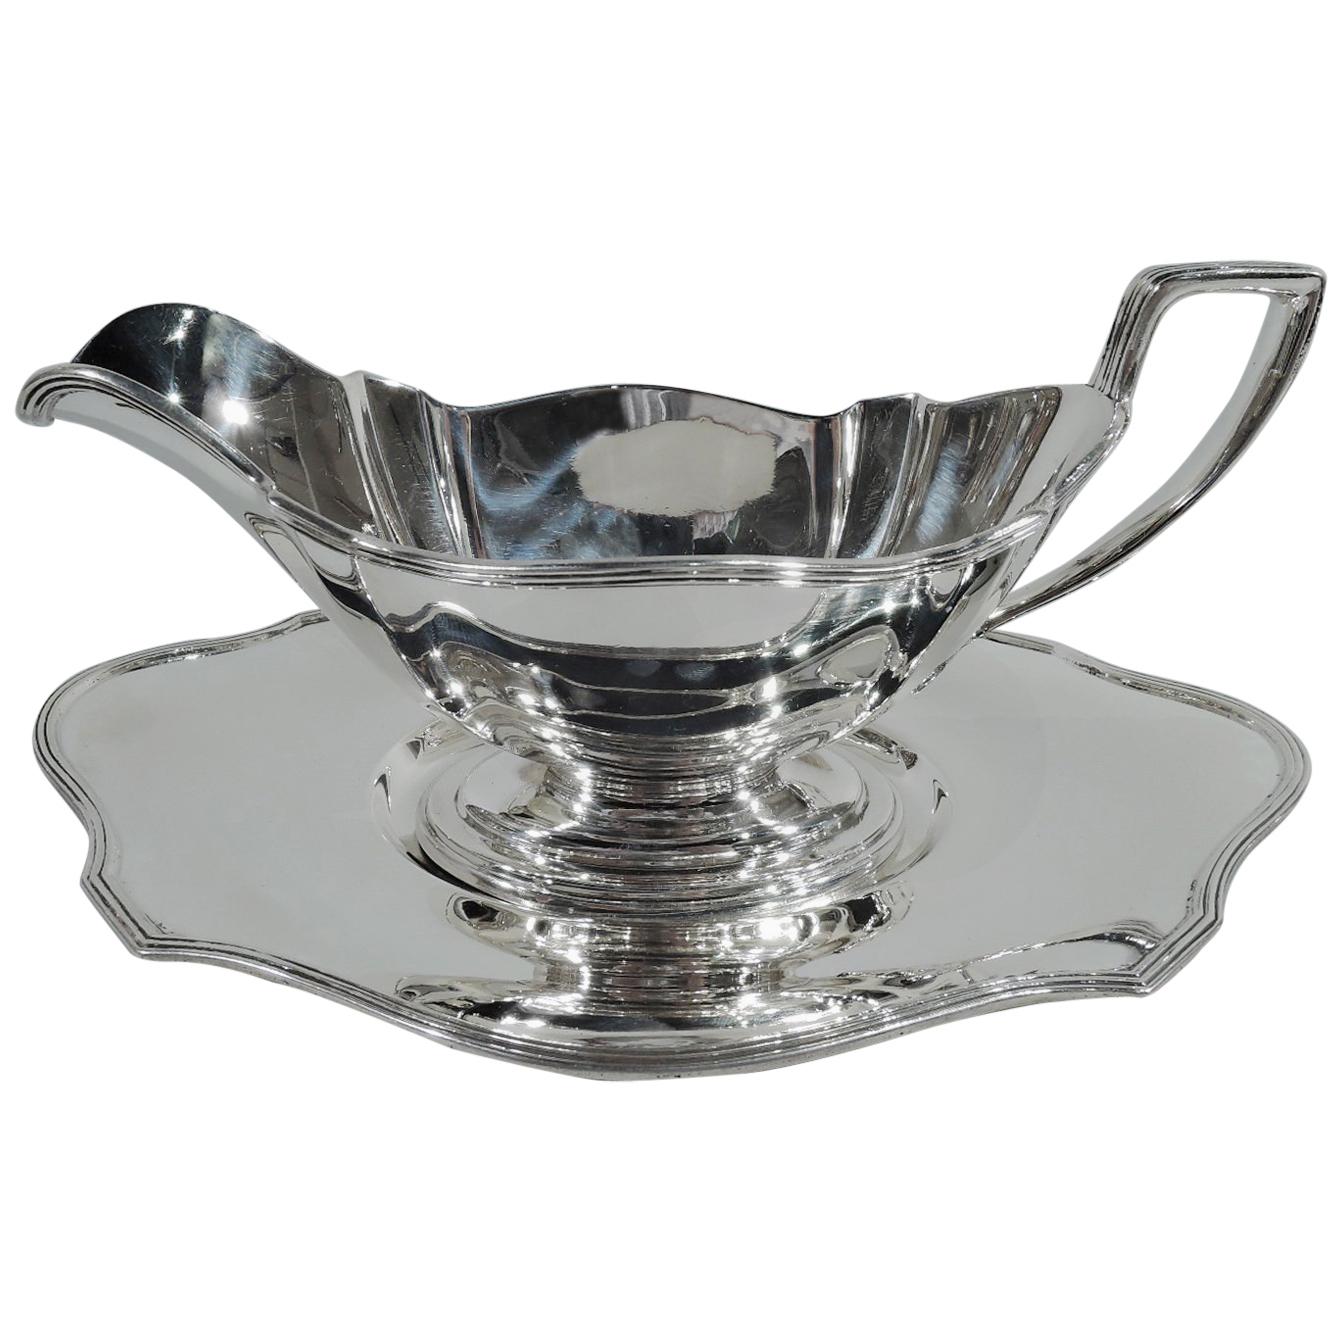 Gorham Sterling Silver Sauce Boat on Stand in Plymouth Pattern